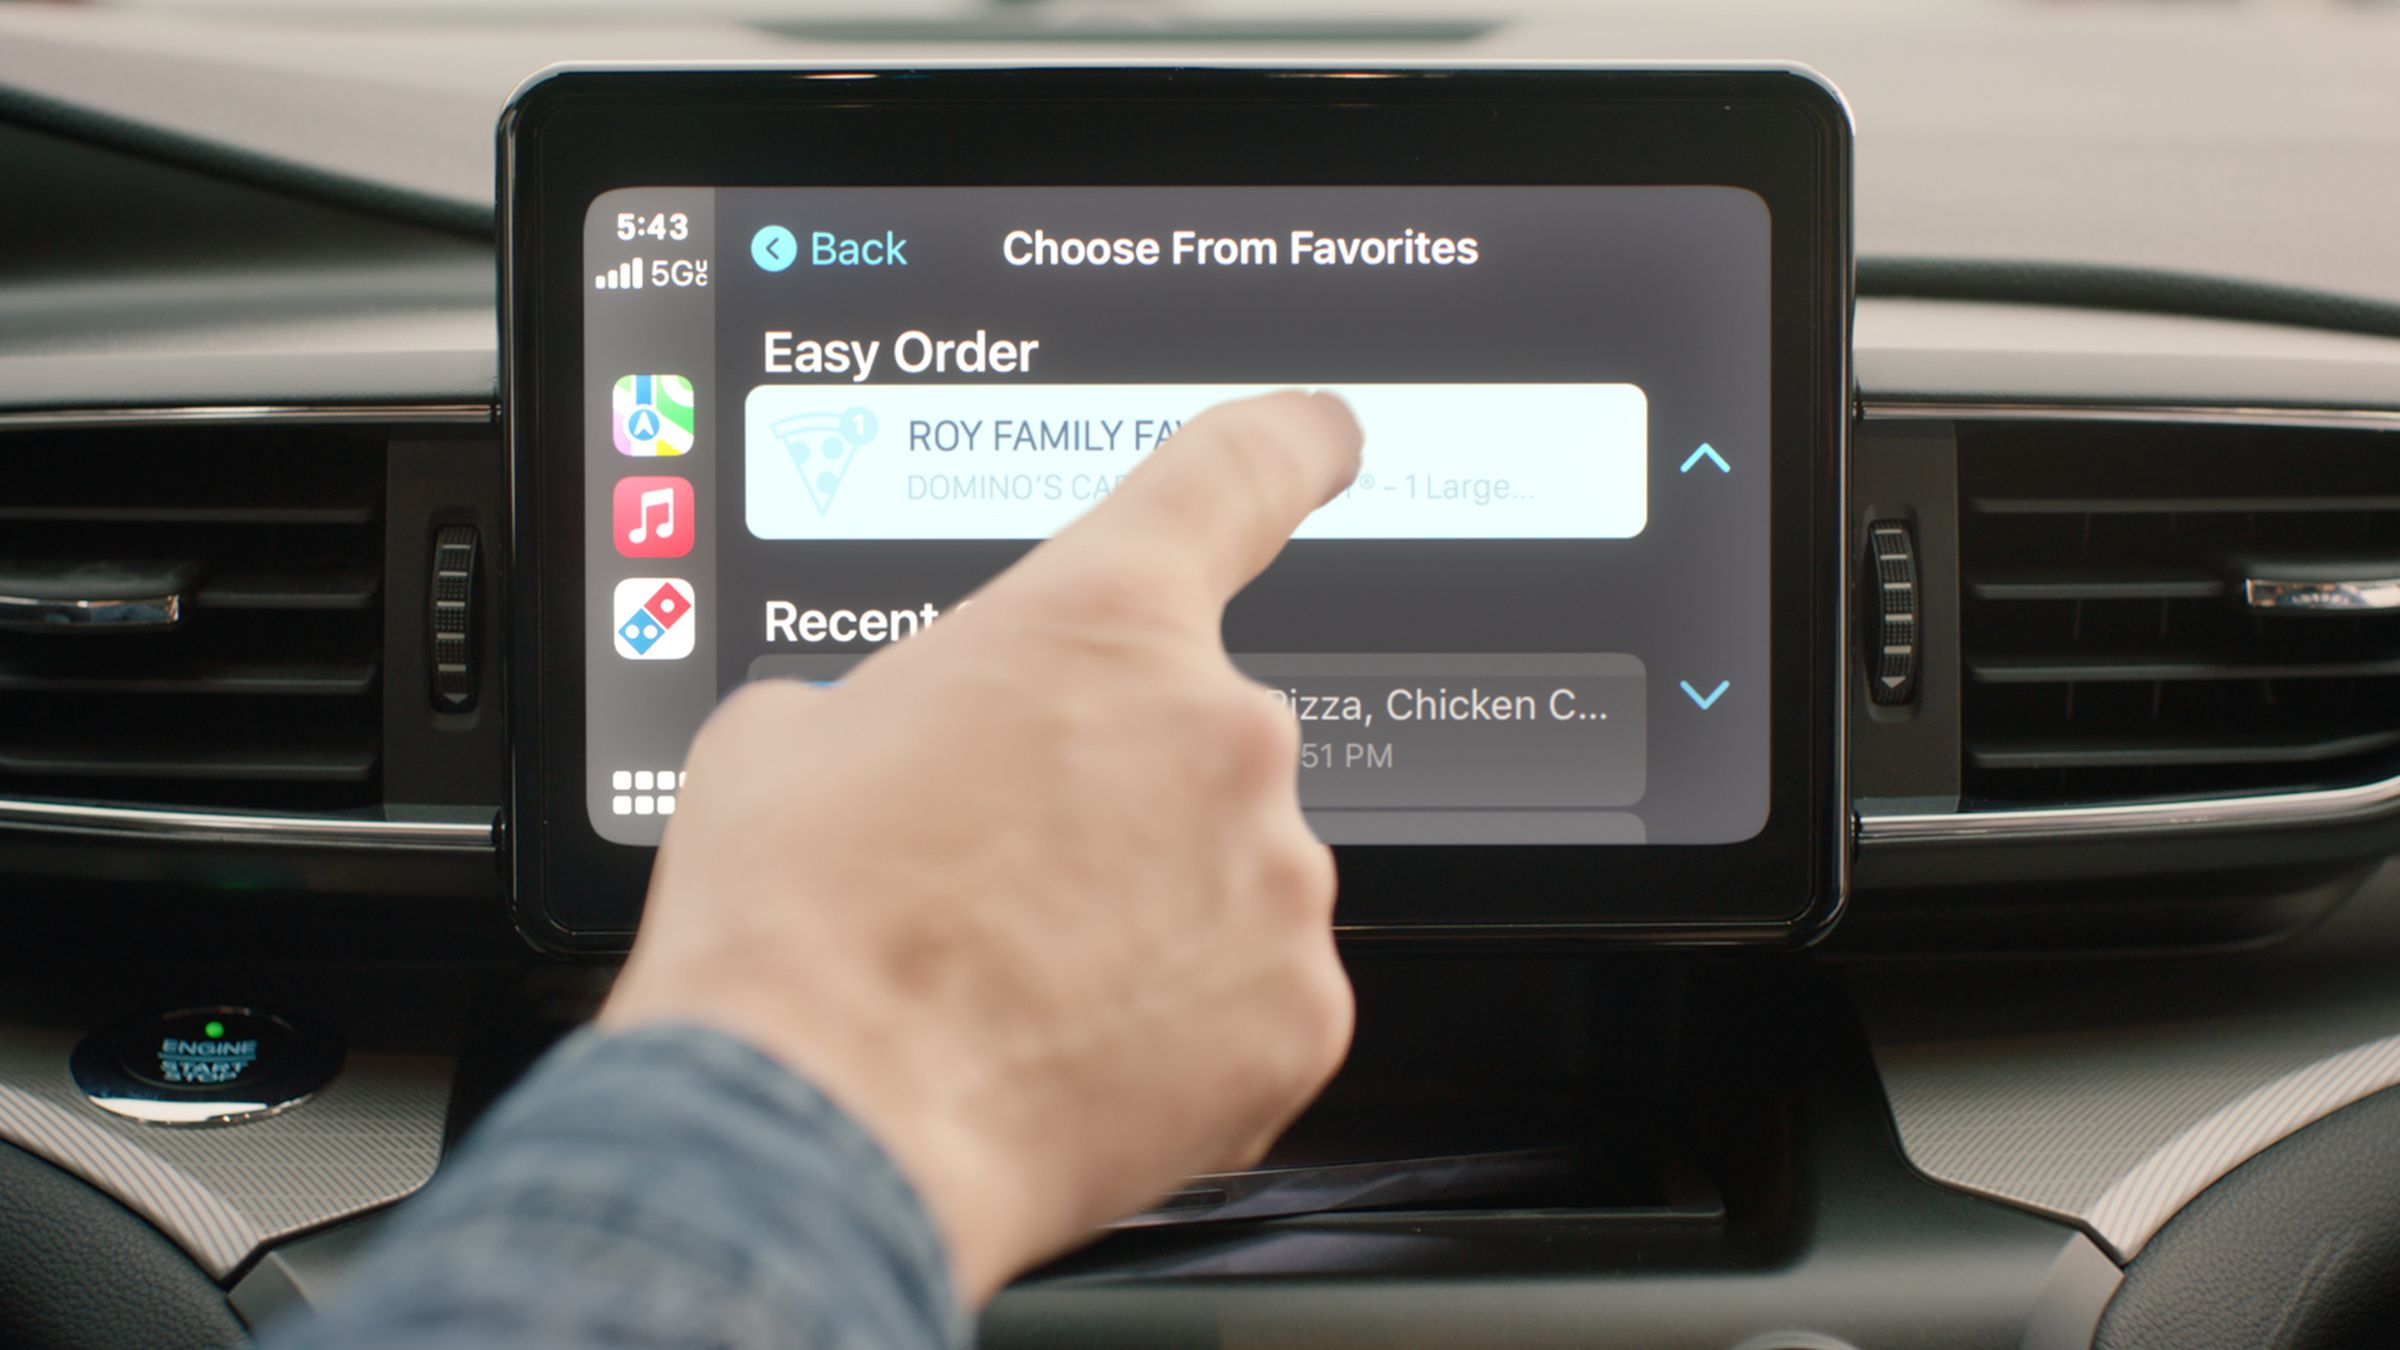 You can tap your favorite order or select from a recent order in the CarPlay Easy Order menu.